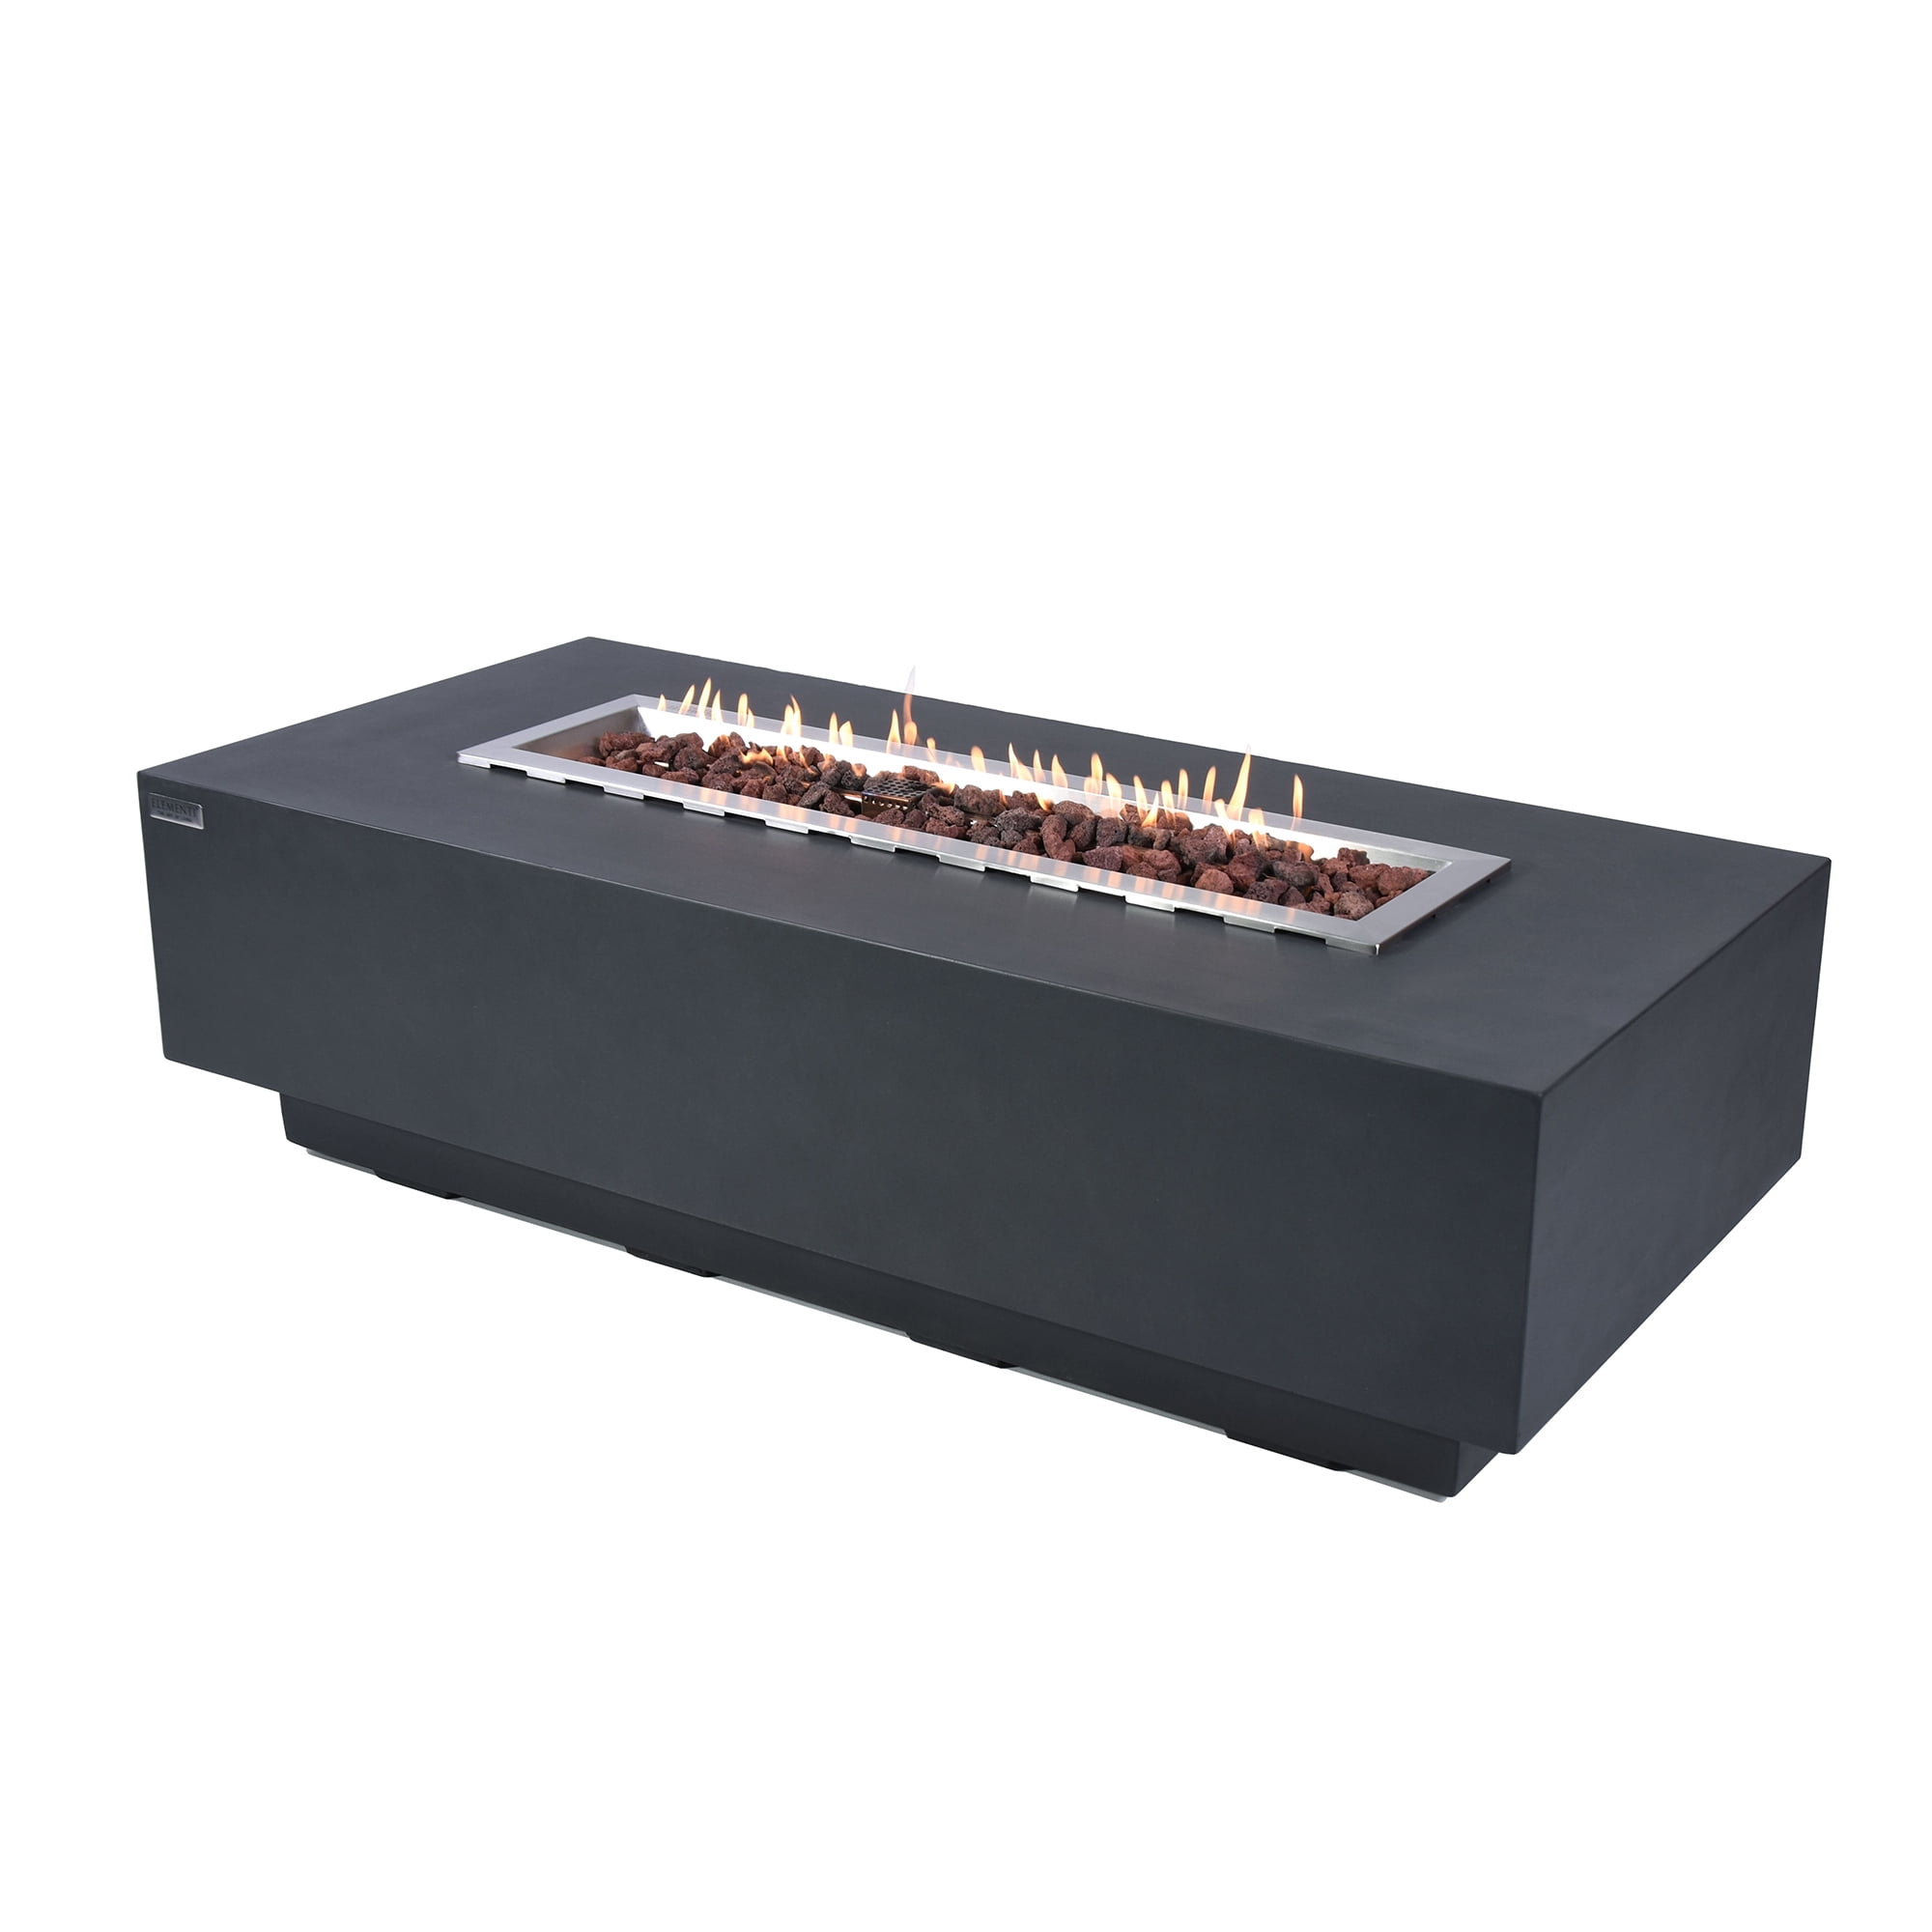 Stainless Steel Burner Elementi Granville Fire Table Cast Concrete Natural Gas Fire Table 45,000 BTU Auto-Ignition Lava Rock Included Outdoor Fire Pit Fire Table/Patio Furniture 